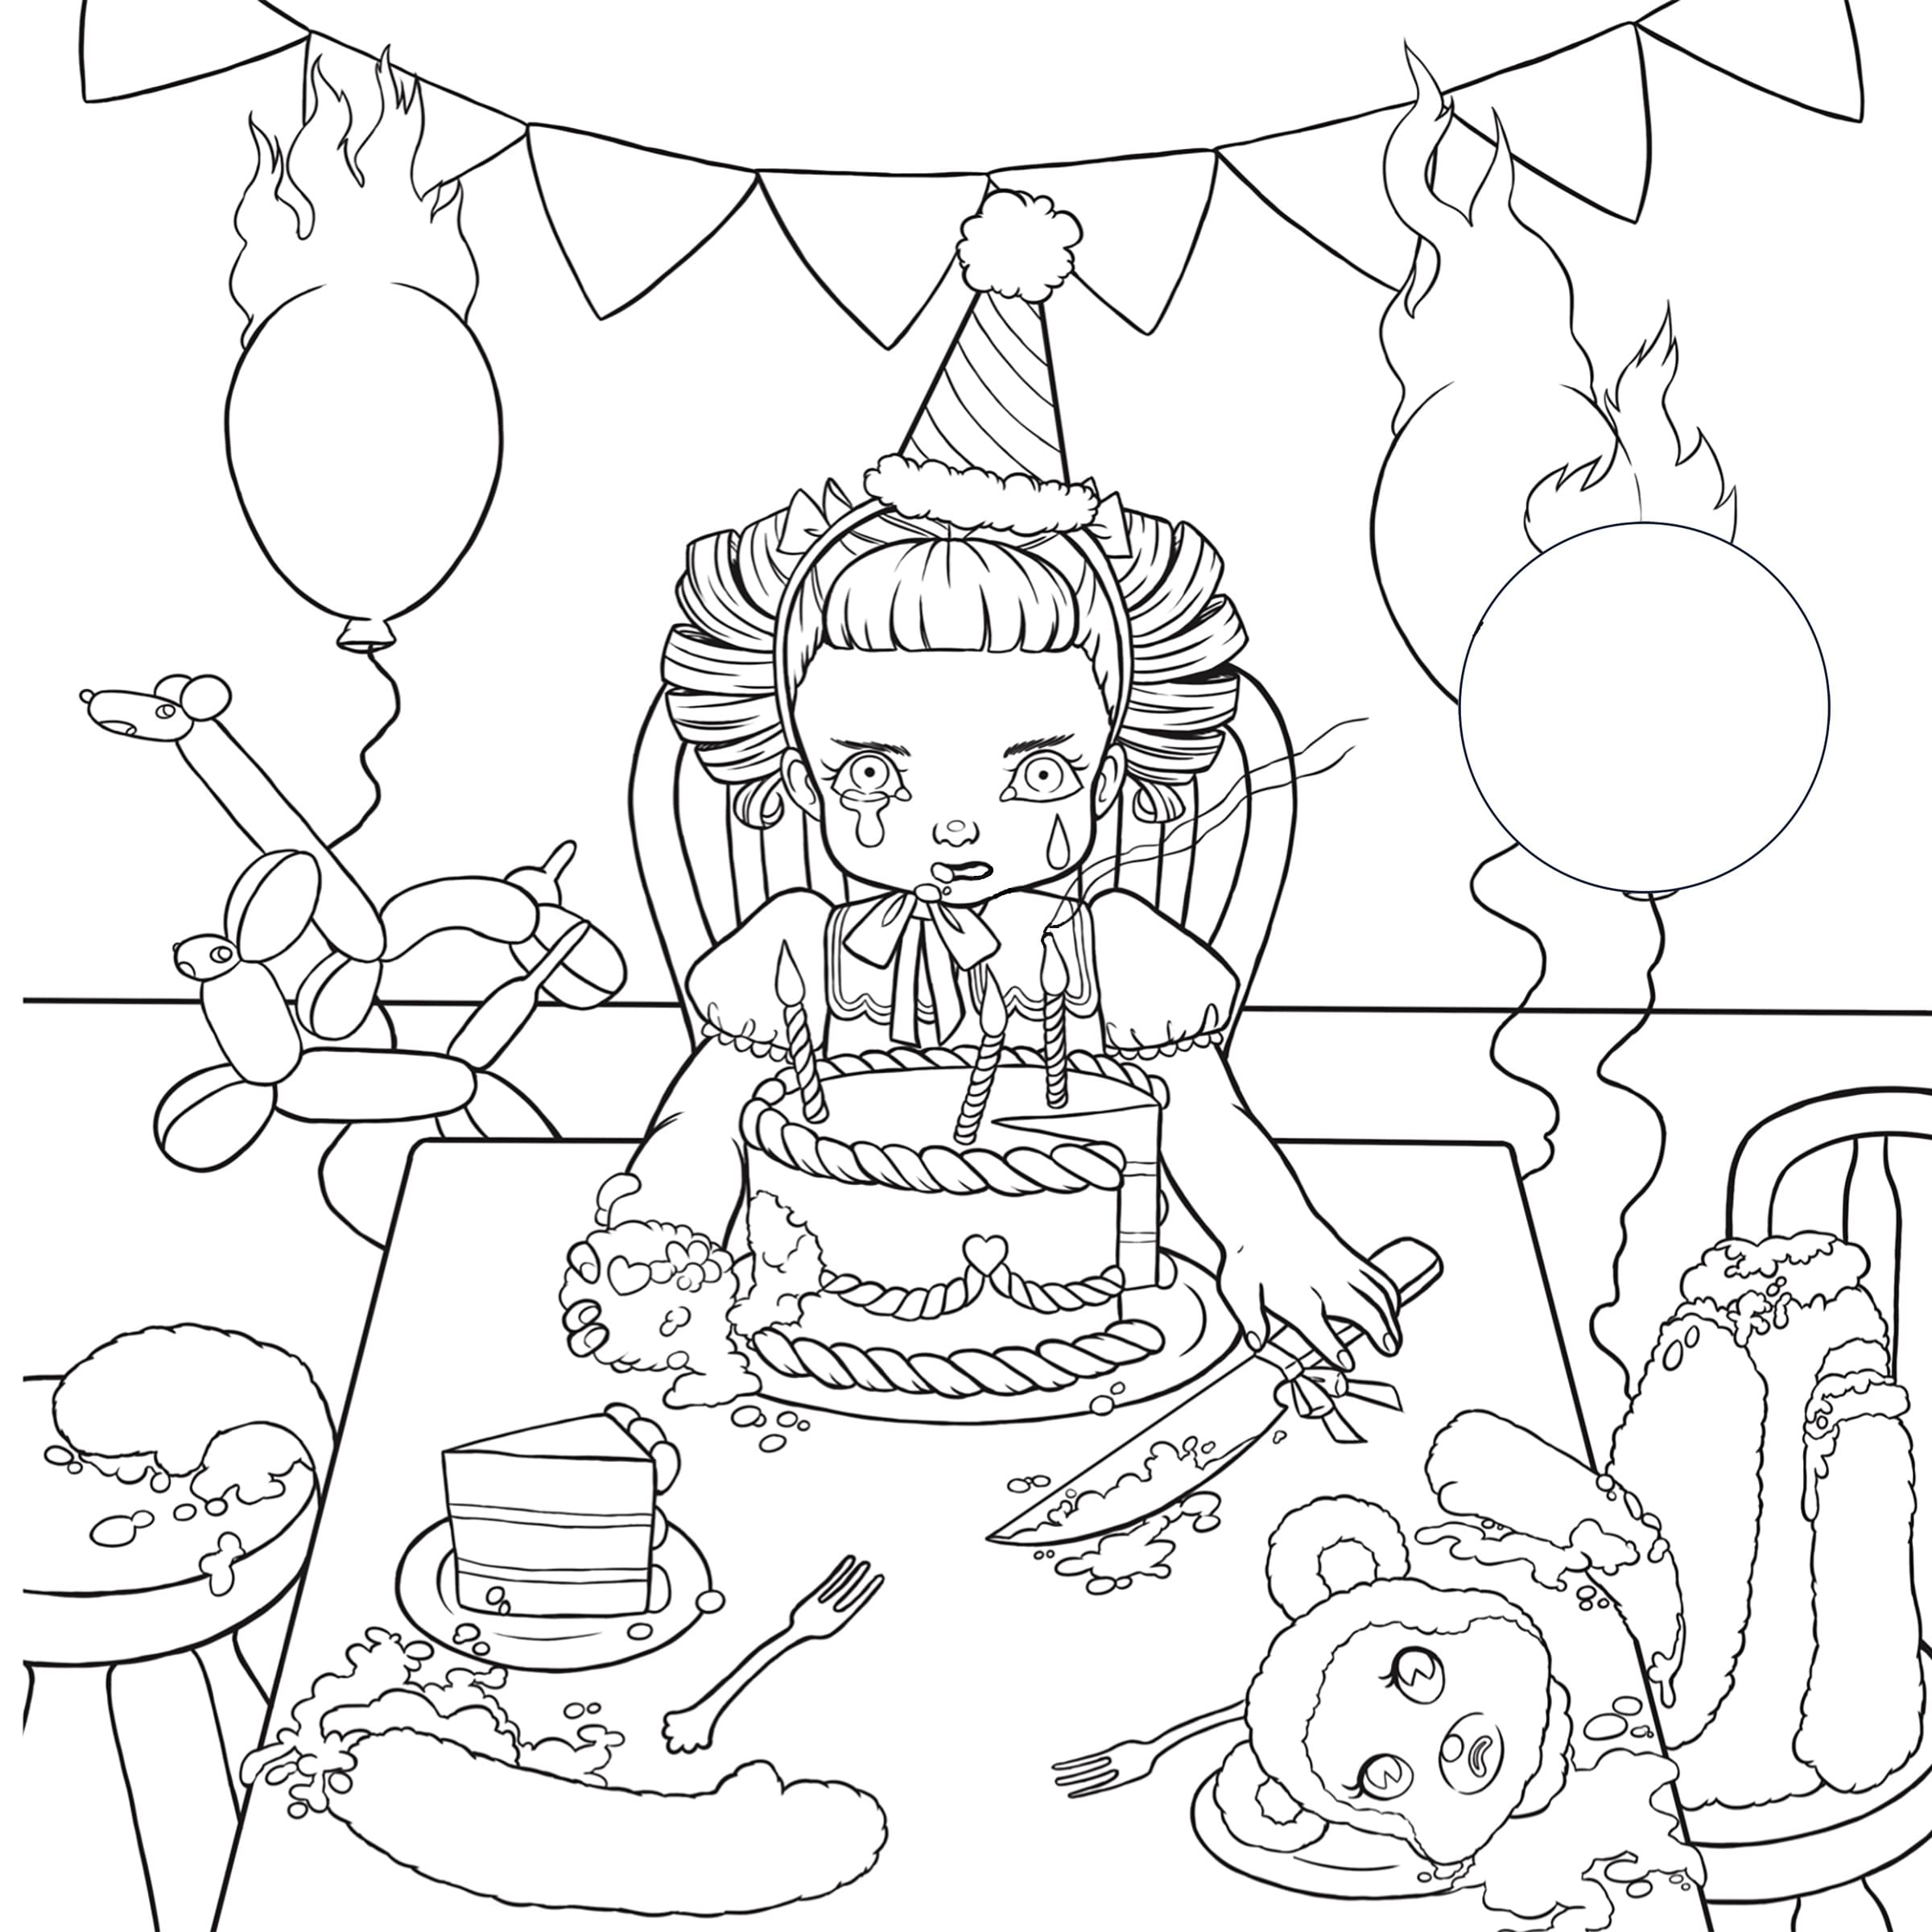 Melanie Martinez Coloring Pages Pitty Party Coloring Pages Sexiz Pix